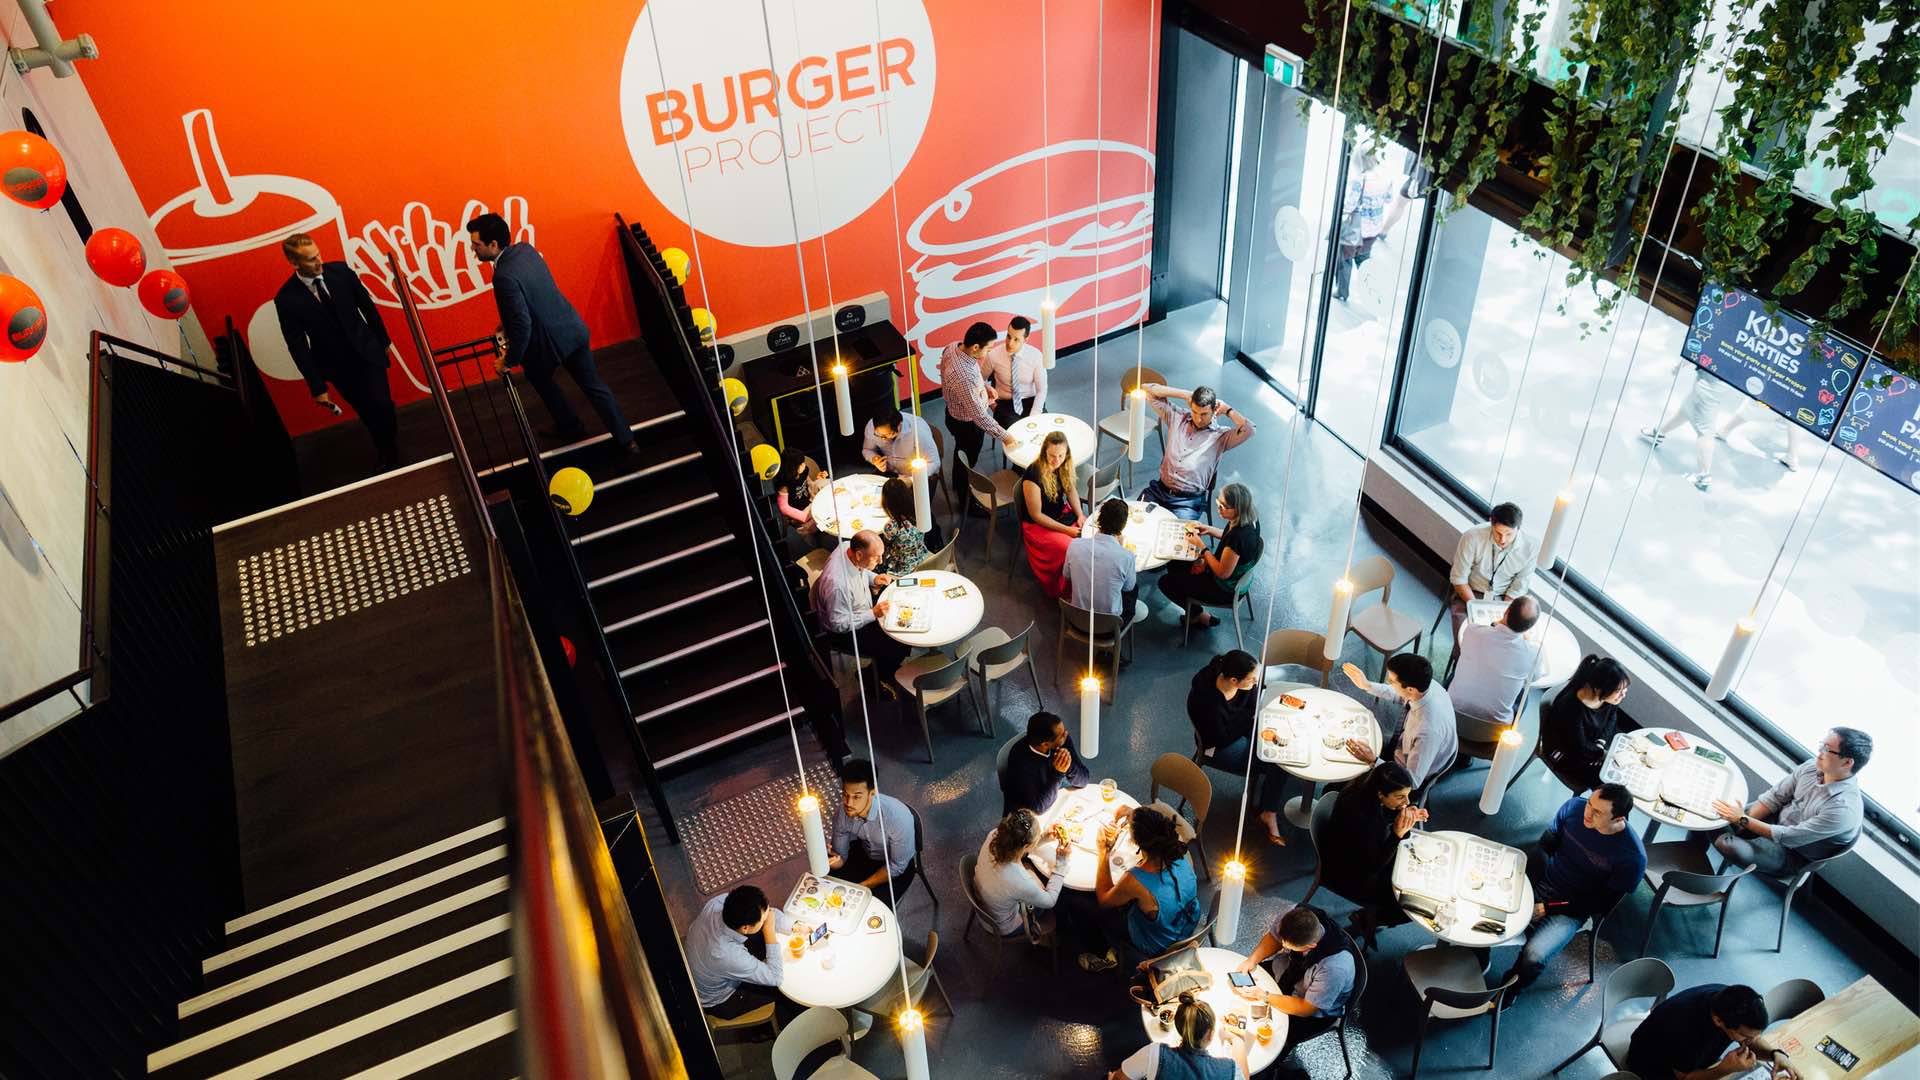 Neil Perry Has Opened a Sprawling New Two-Storey Burger Project Outpost